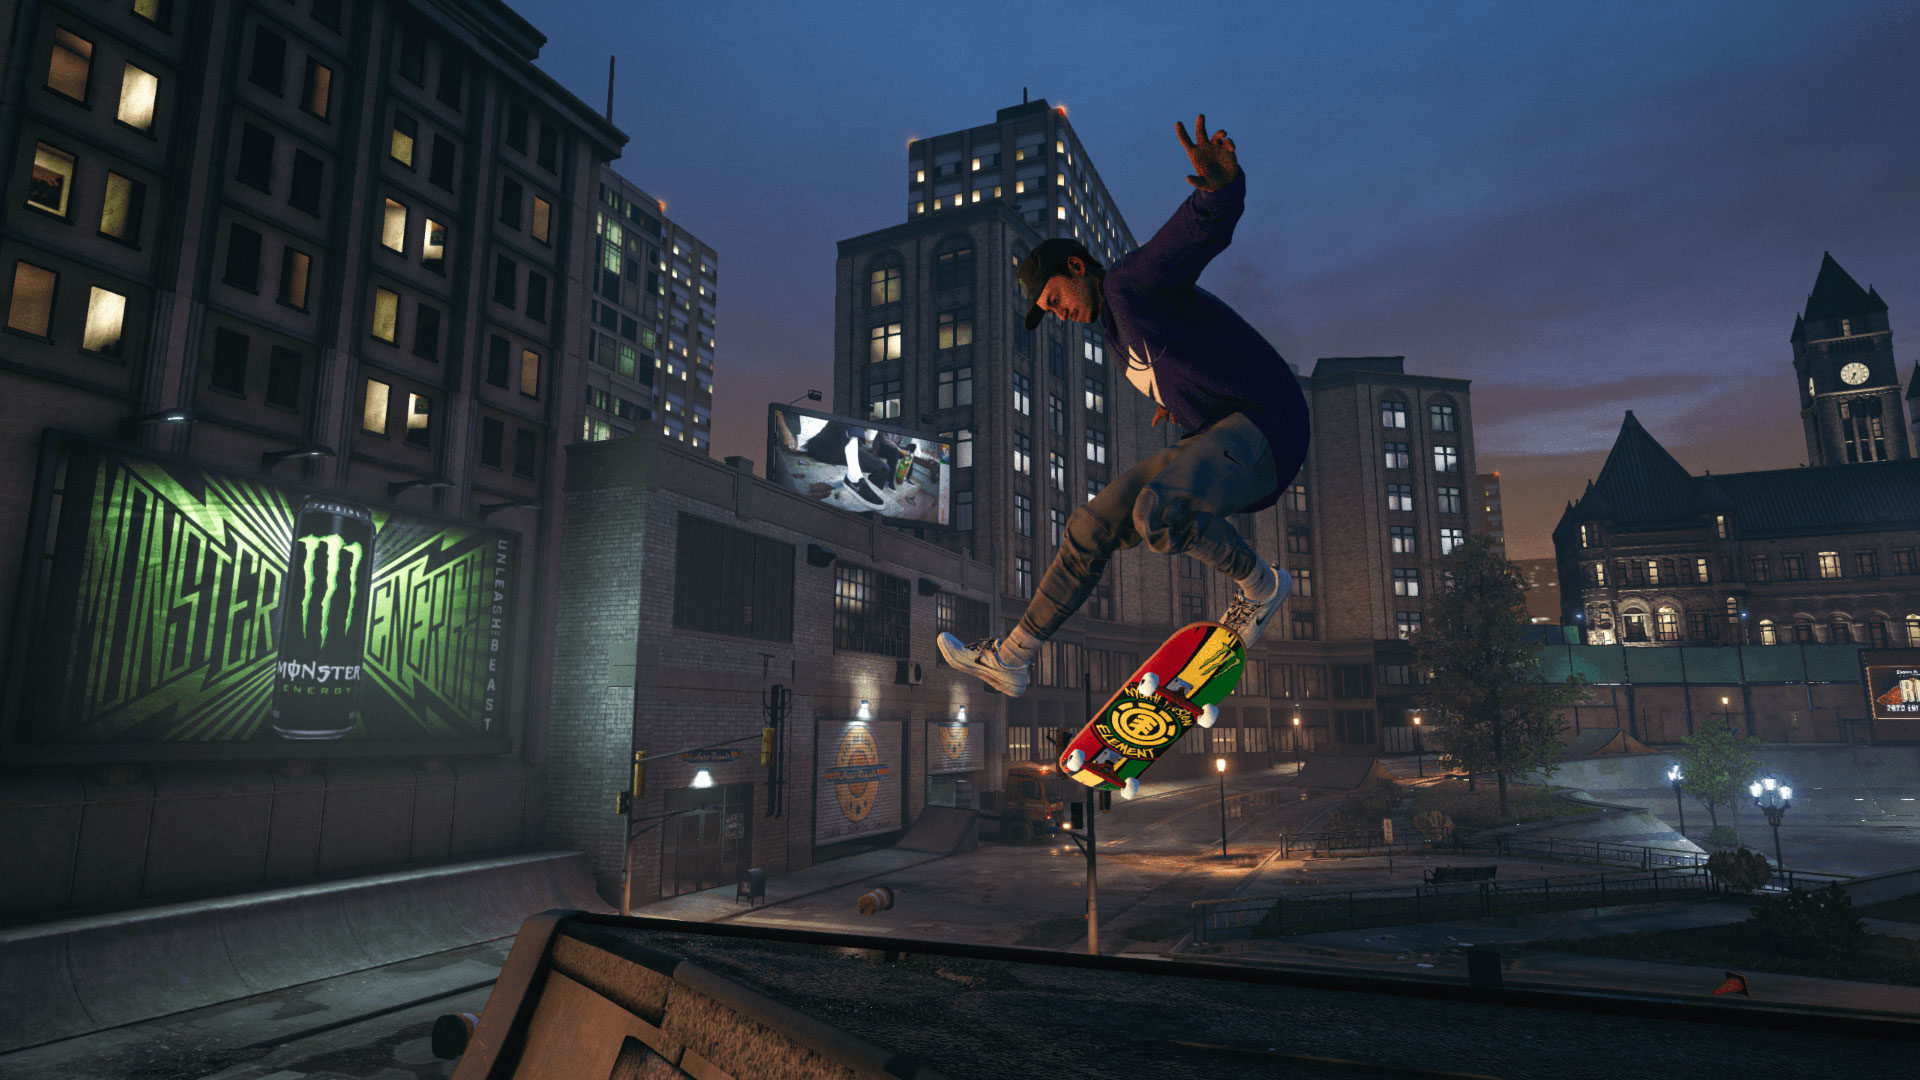 How would you soundtrack a Tony Hawk's Pro Skater game in 2020?